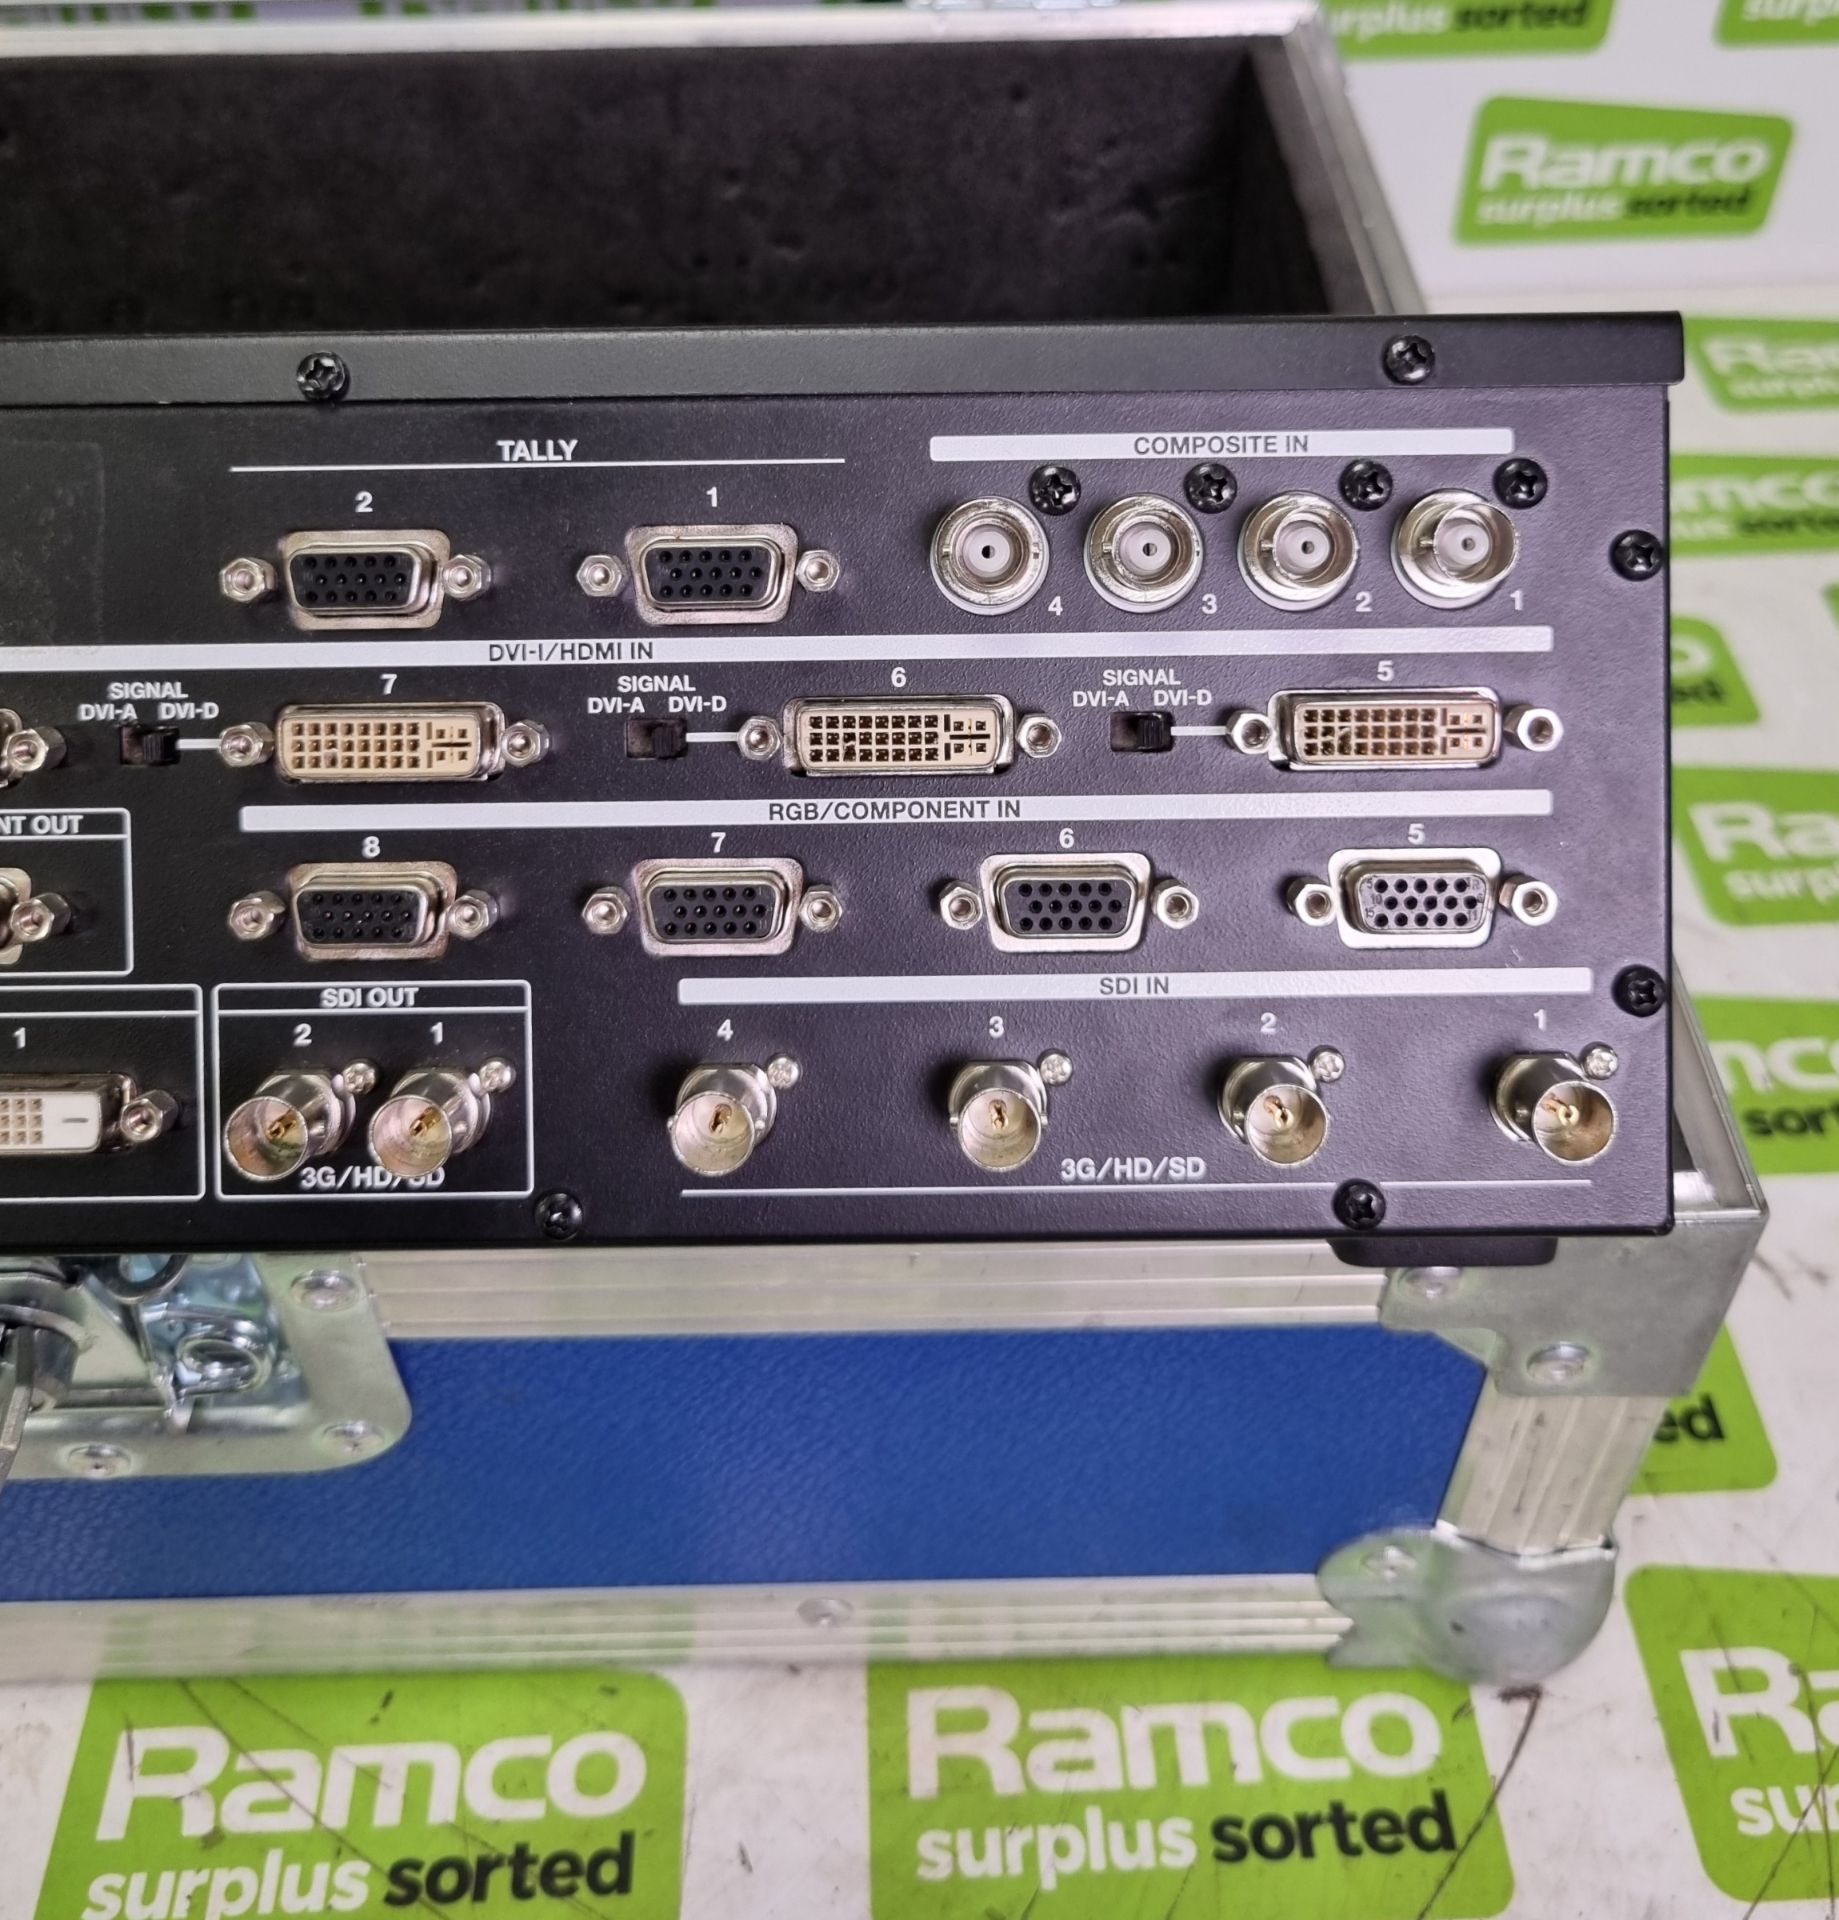 Roland V-800HD multi-format video switcher with flight case - FAULTY (OUTPUT 3/4 FREEZING) - Image 6 of 9